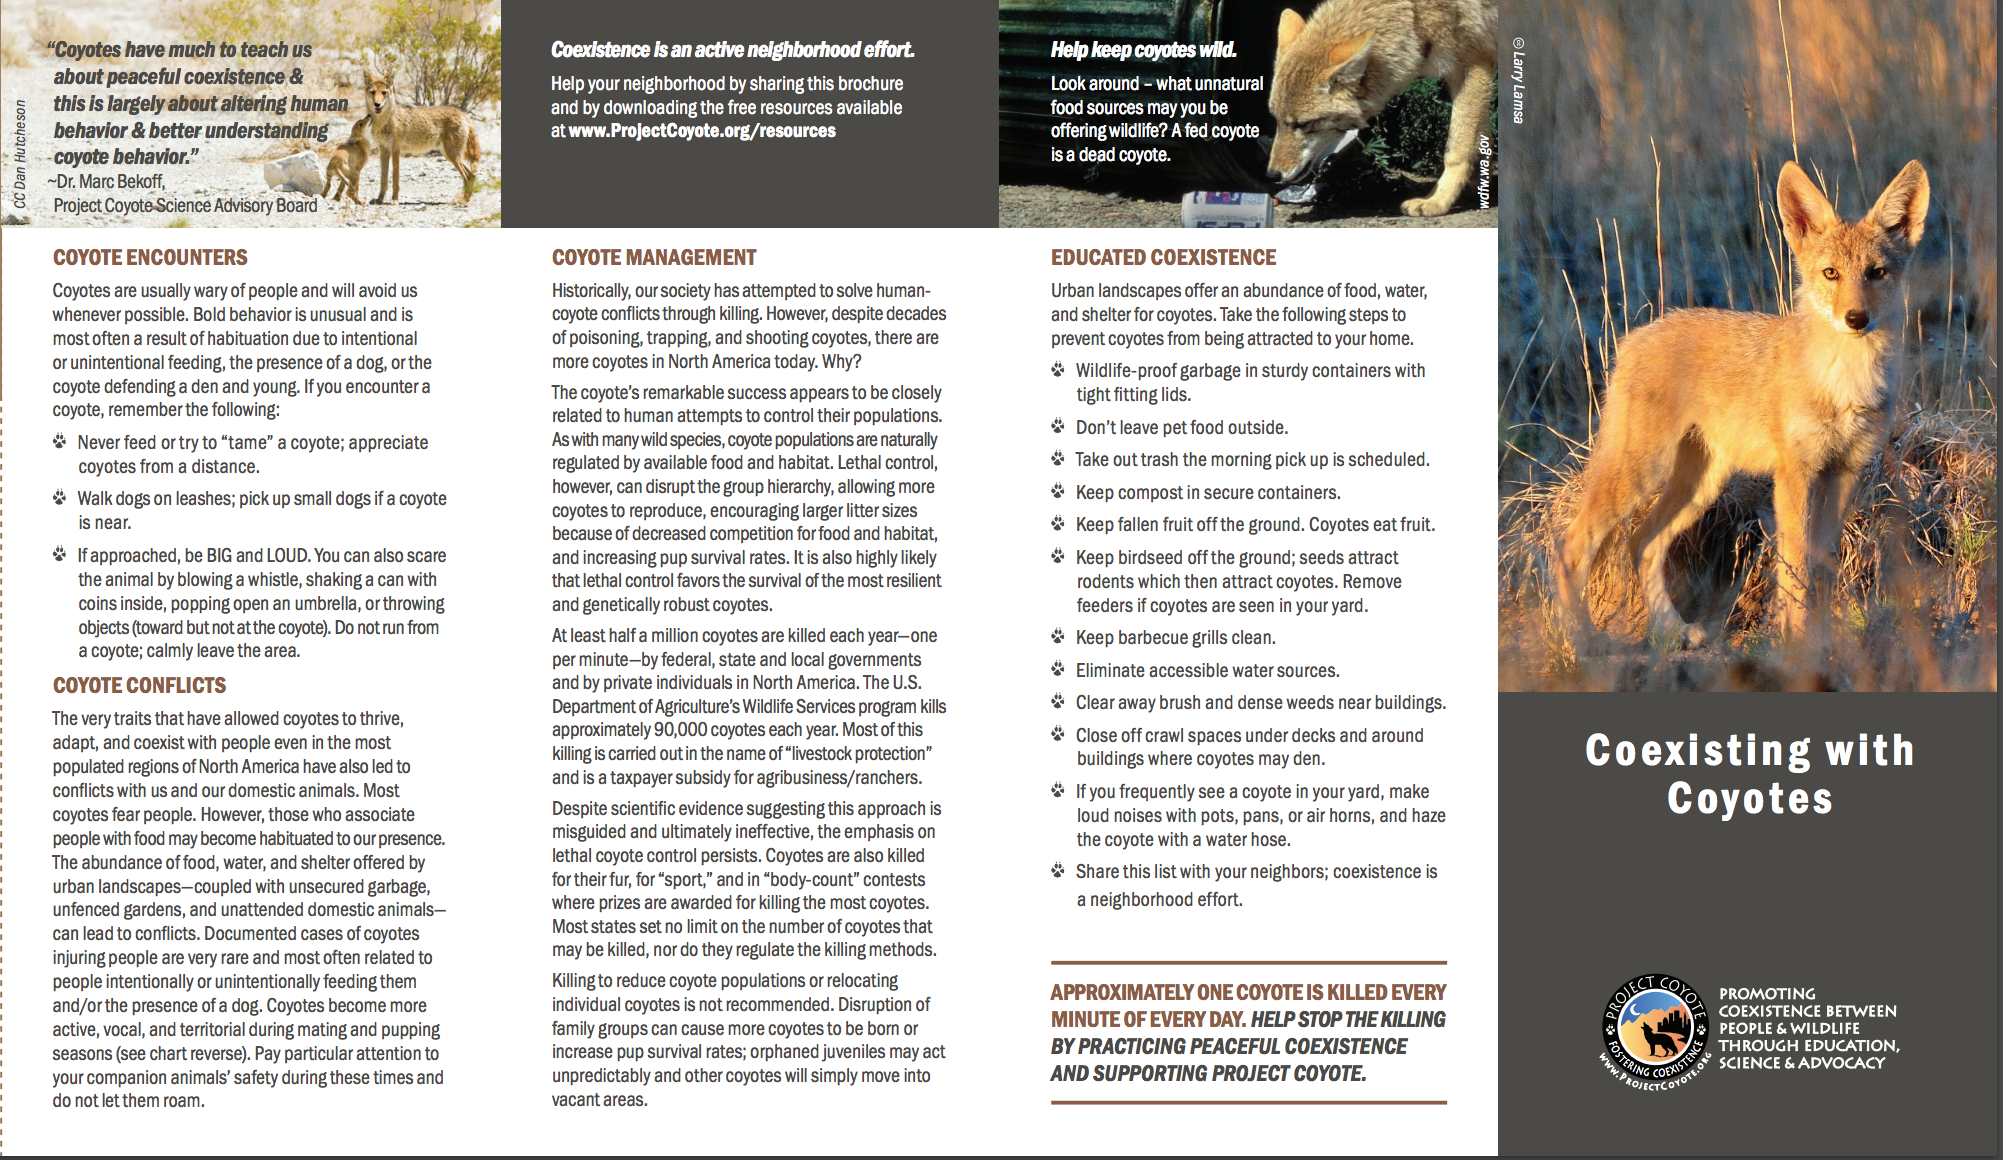 Brochure from Project Coyote